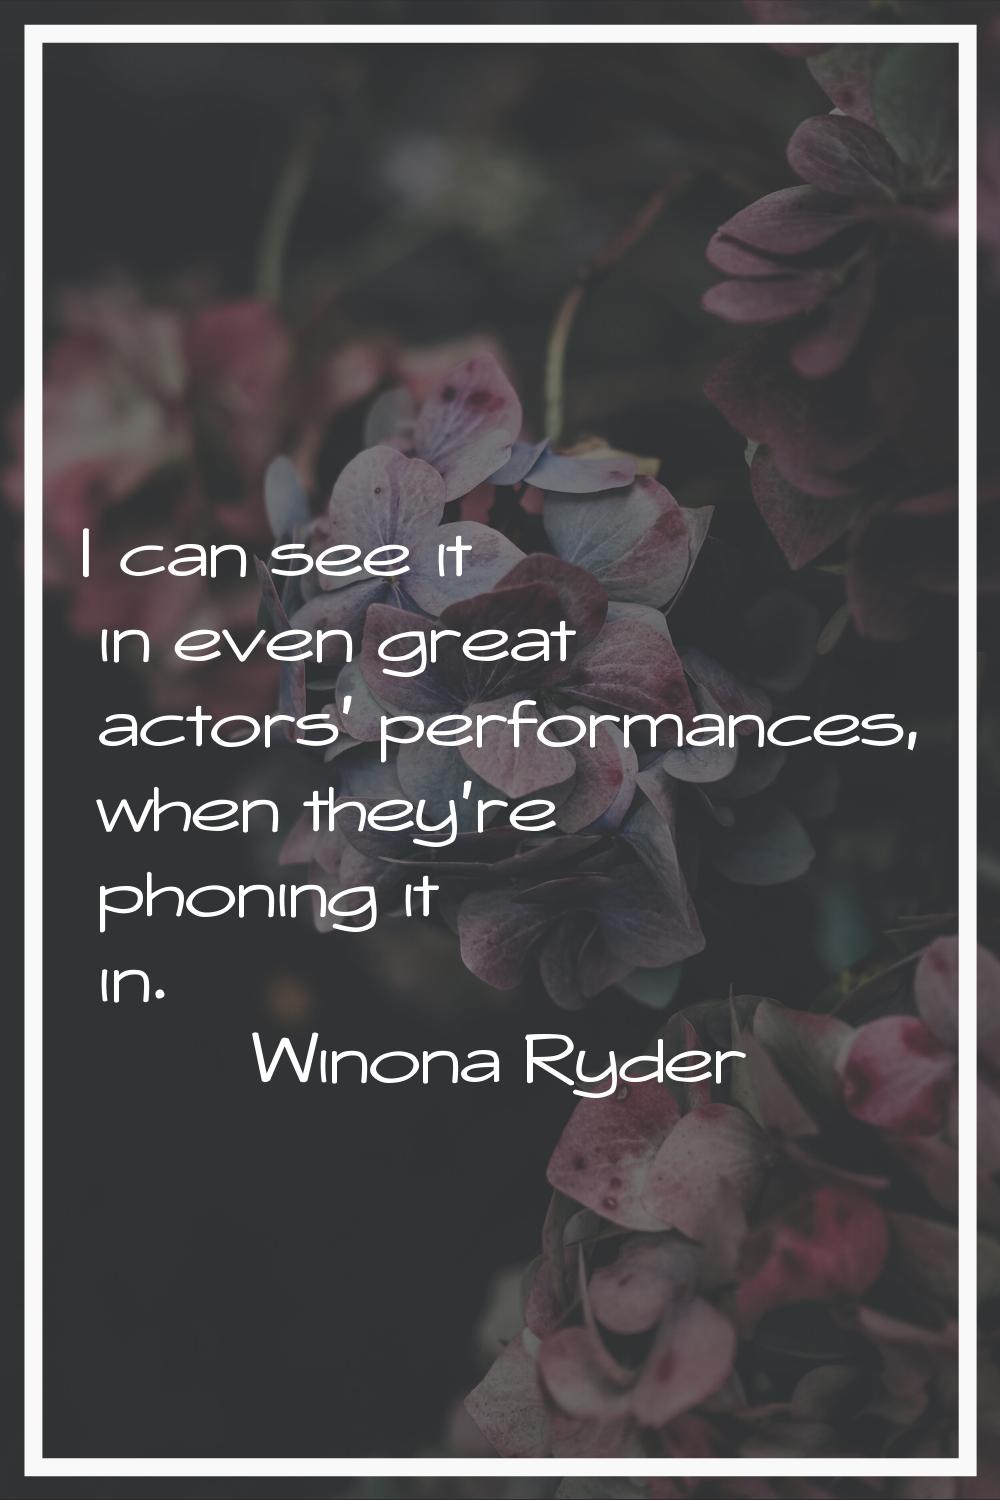 I can see it in even great actors' performances, when they're phoning it in.